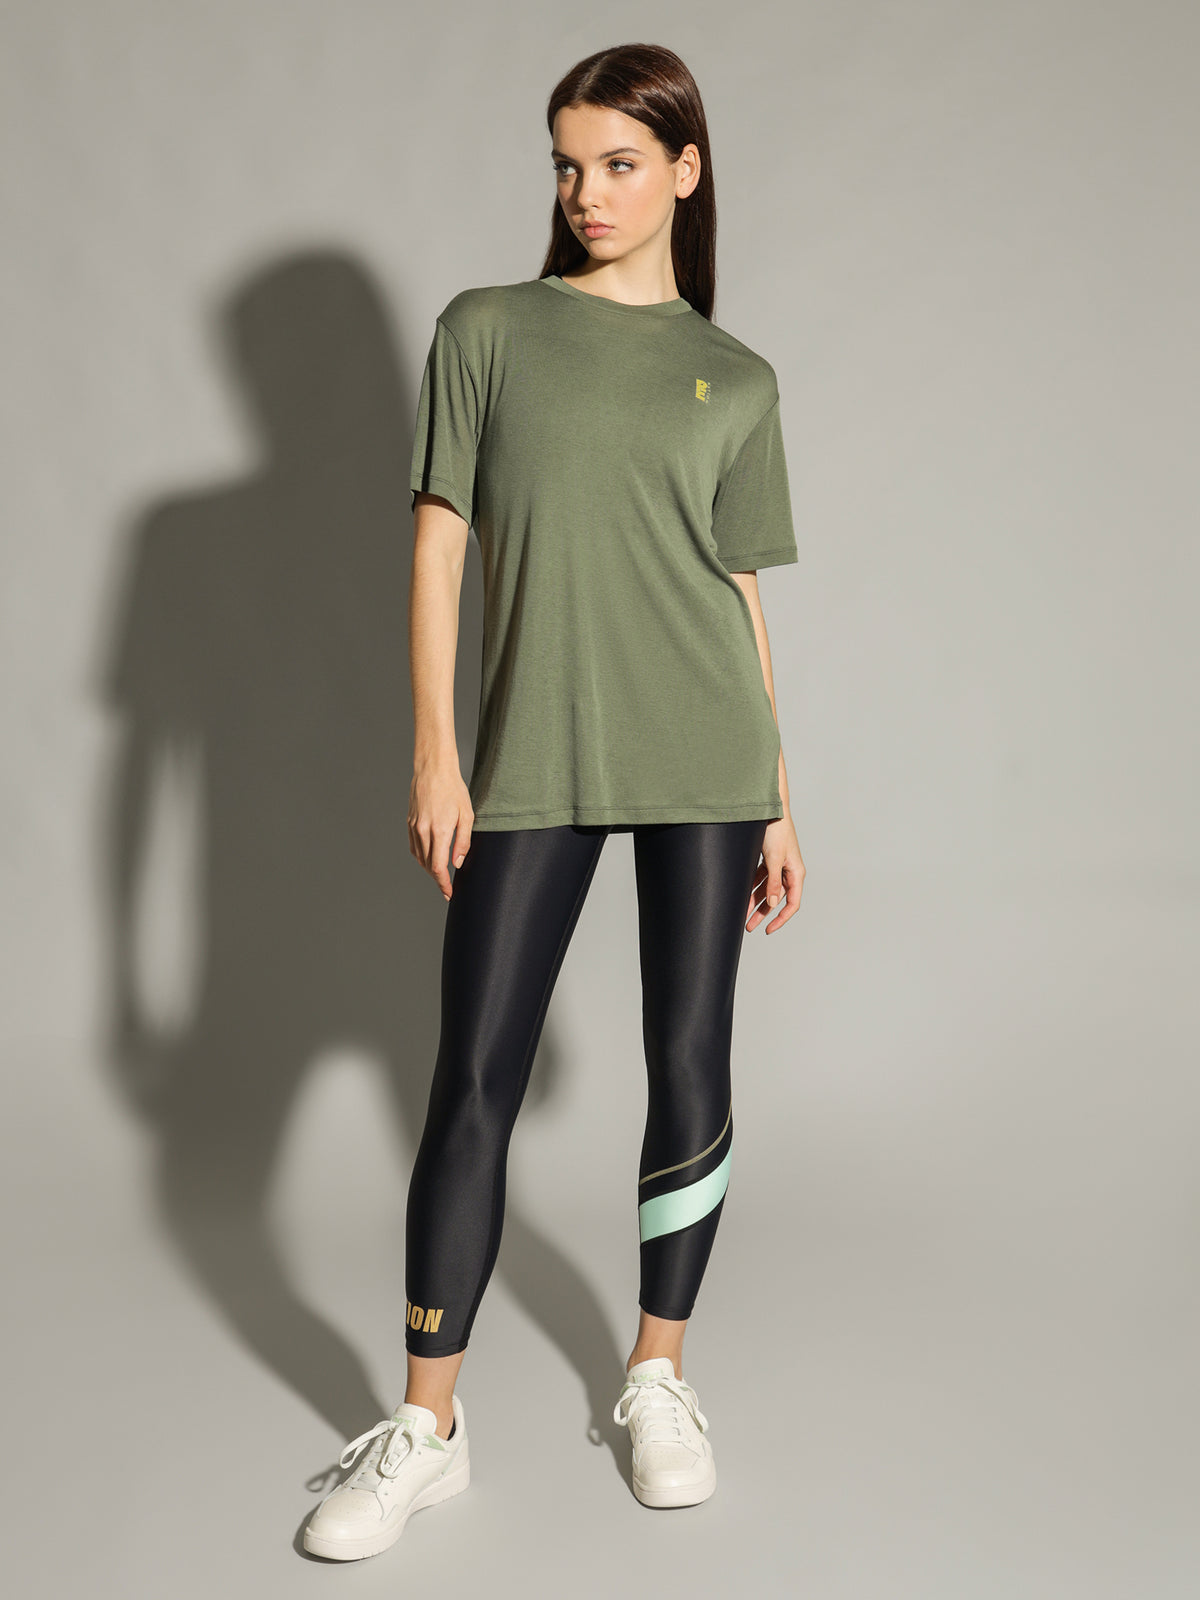 Reset T-Shirt in Four Leaf Clover Green